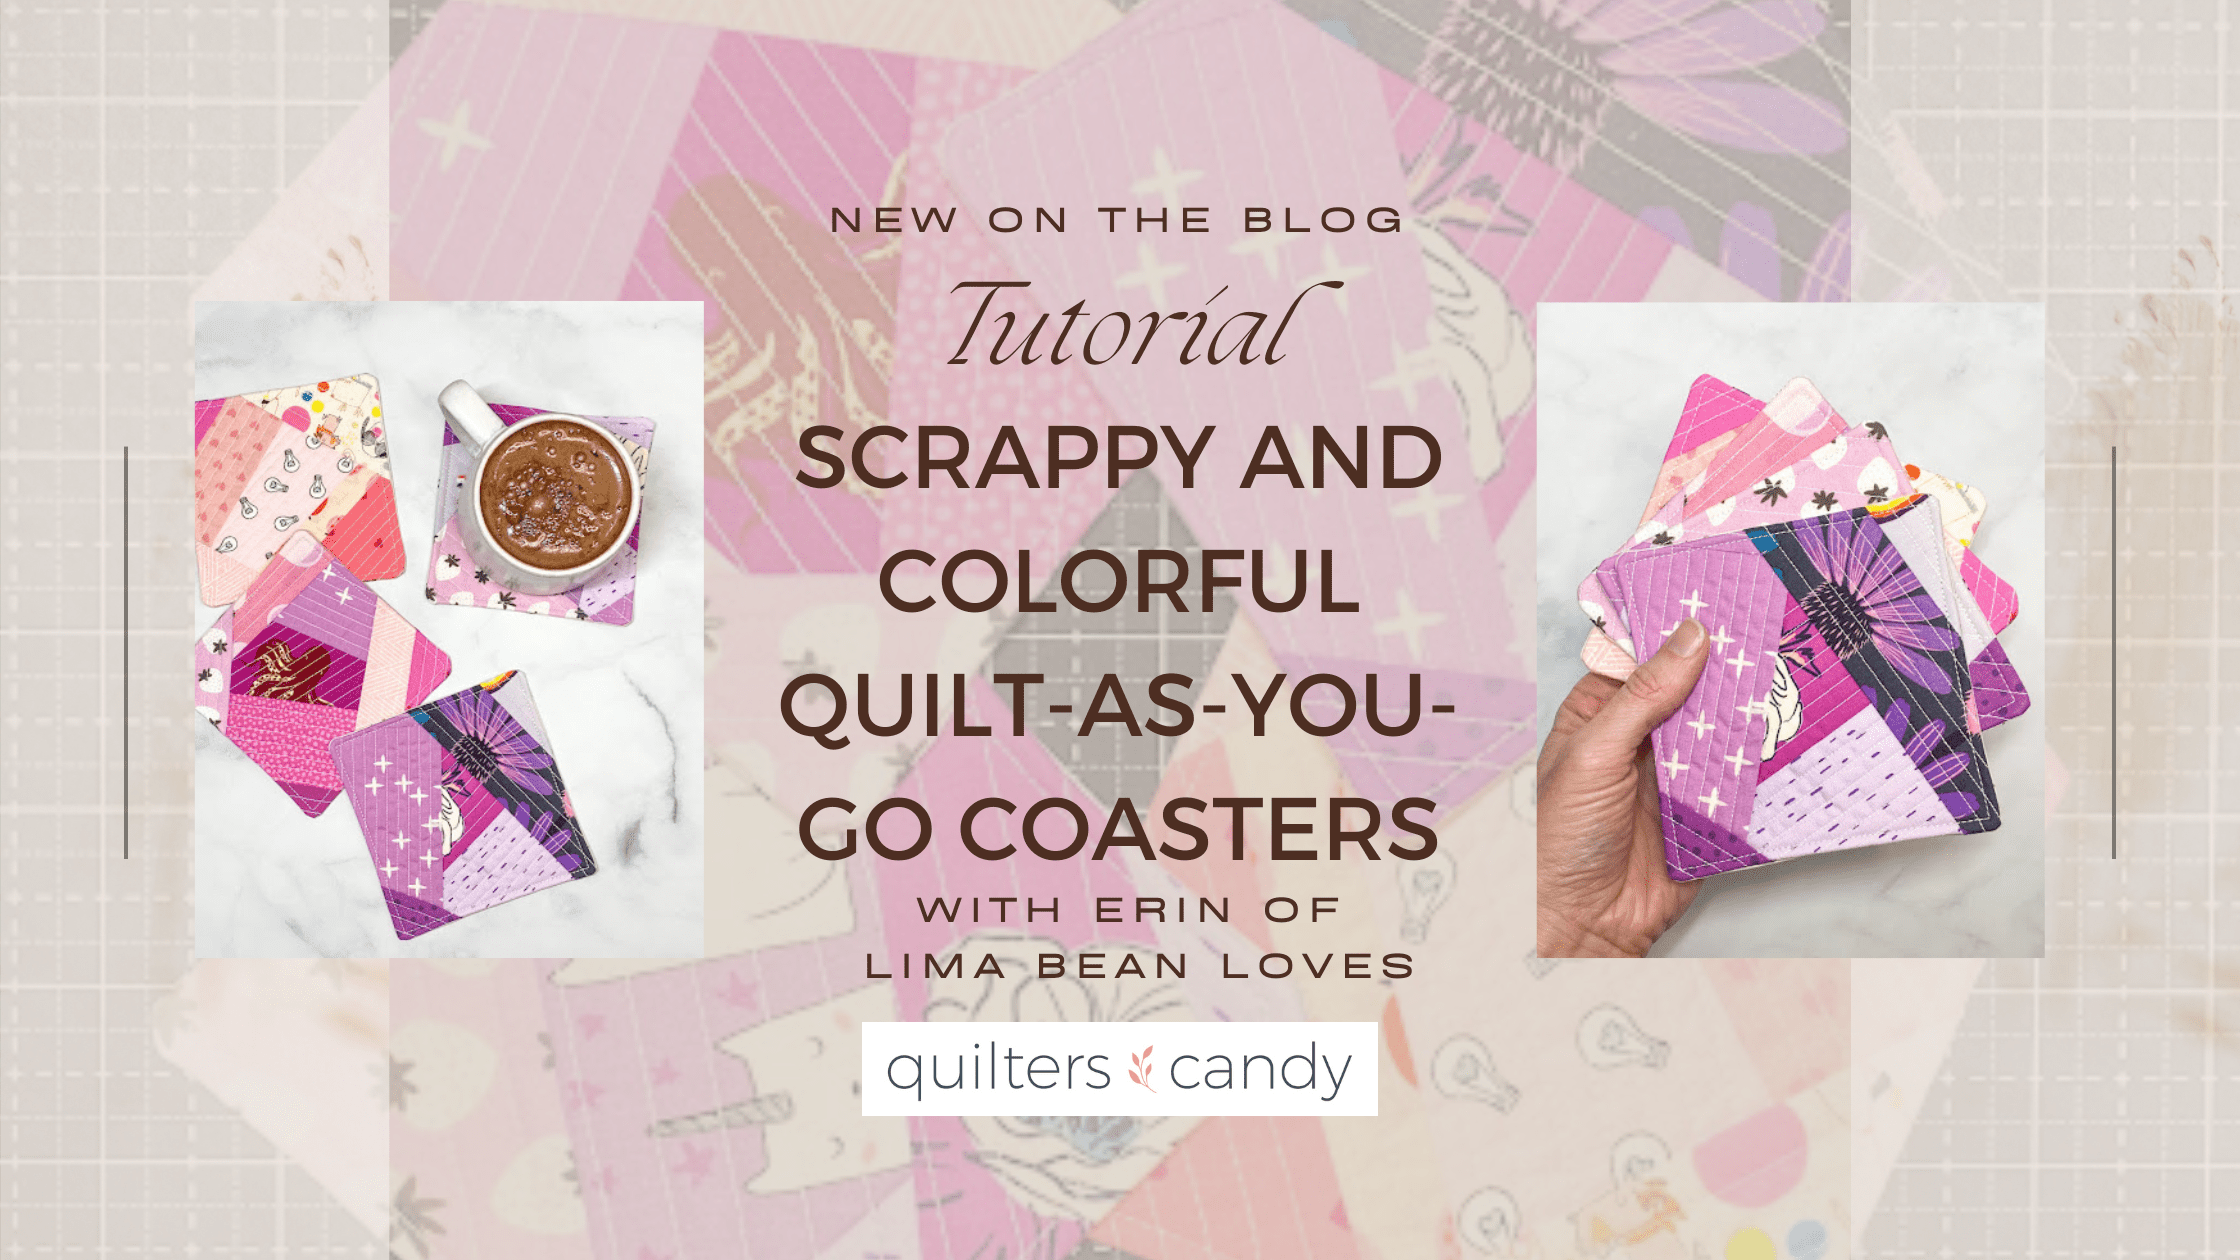 SCRAPPY AND COLORFUL QUILT-AS-YOU-GO COASTERS